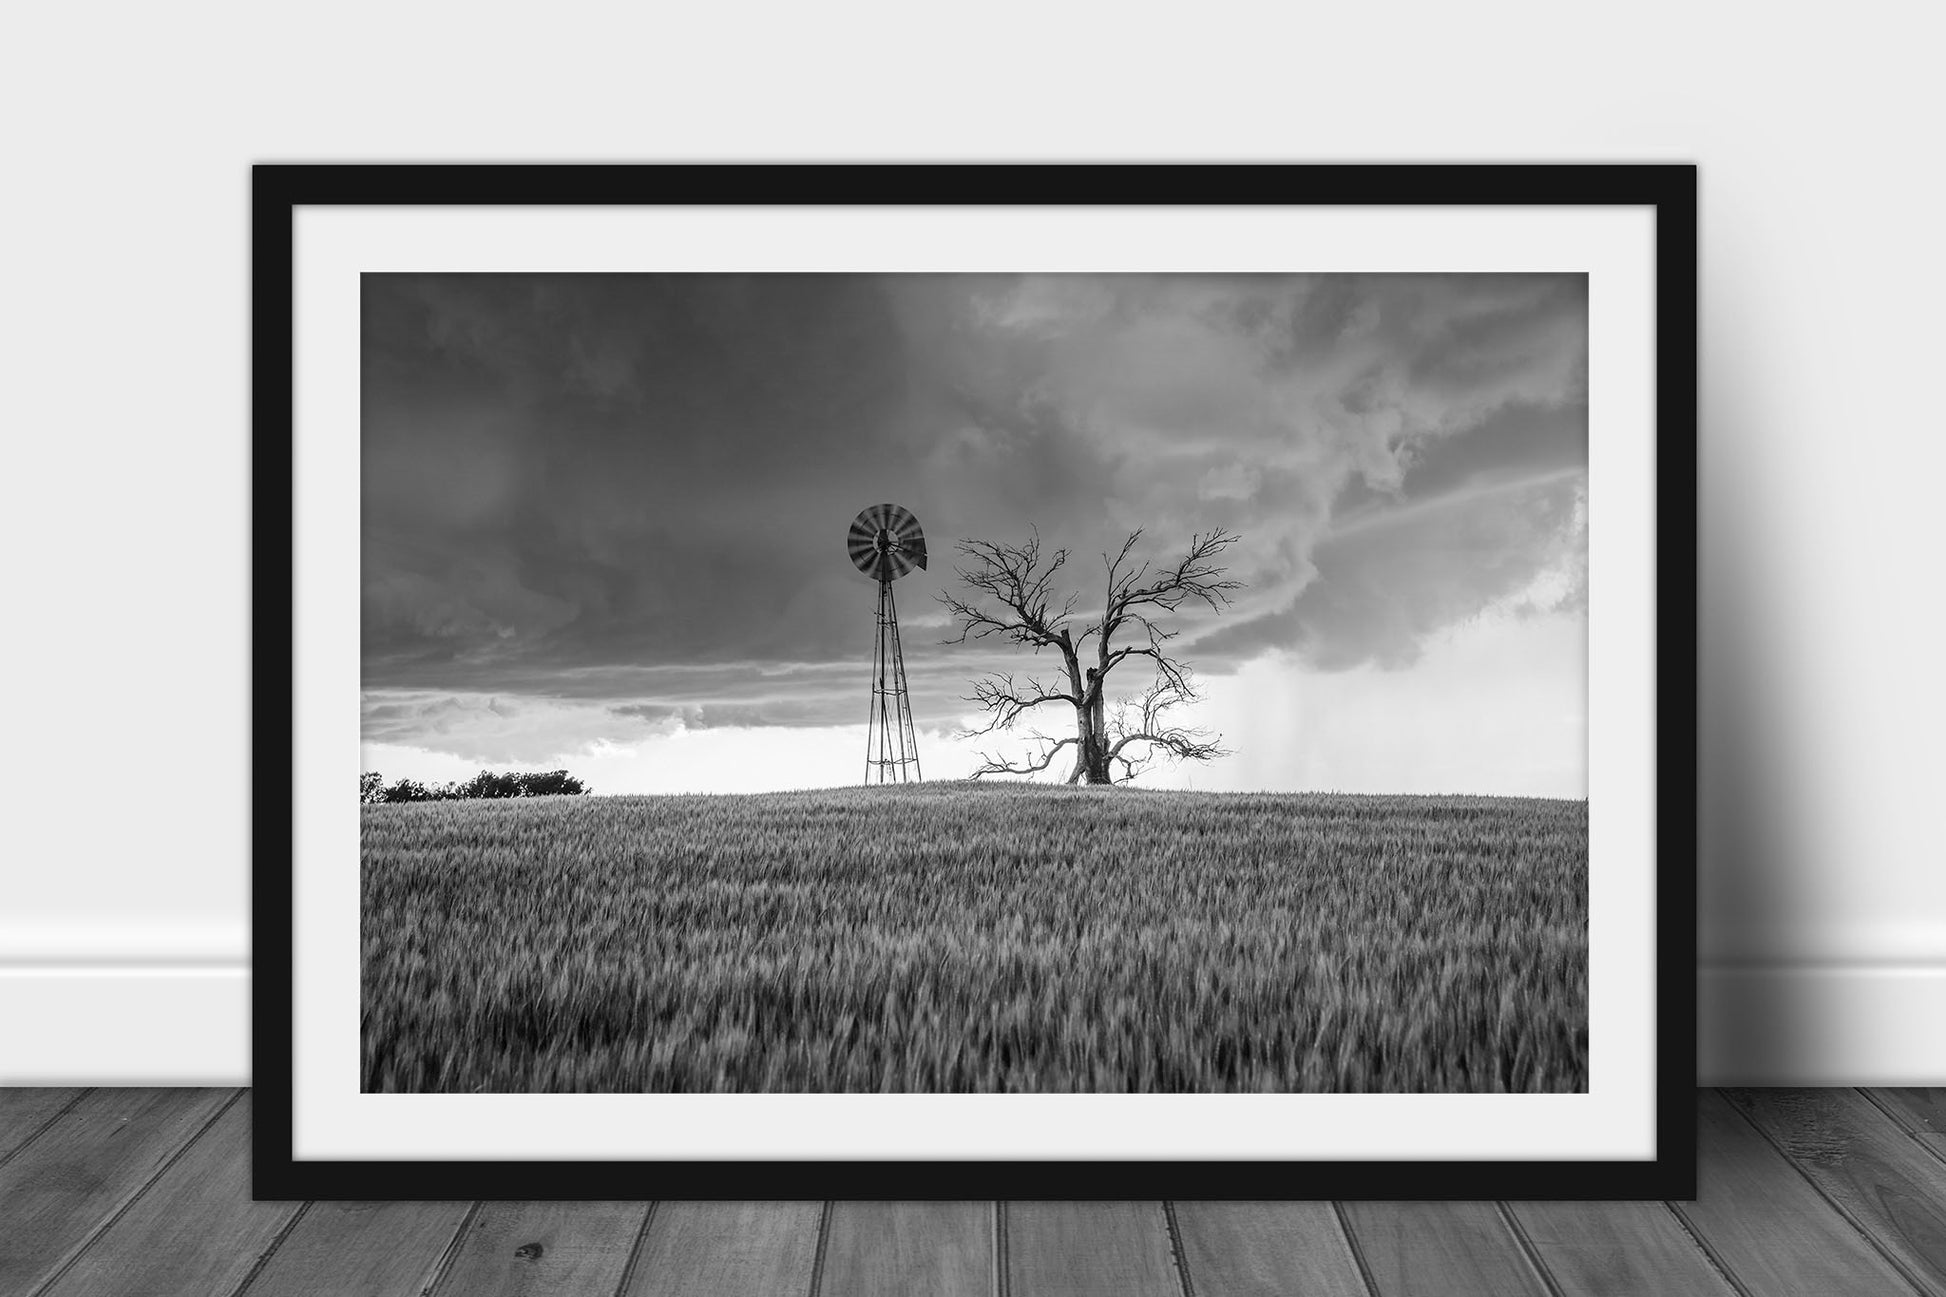 Framed and matted black and white country photography print of an old windmill and dead tree in a wheat field as a storm approaches on a spring day in Oklahoma by Sean Ramsey of Southern Plains Photography.